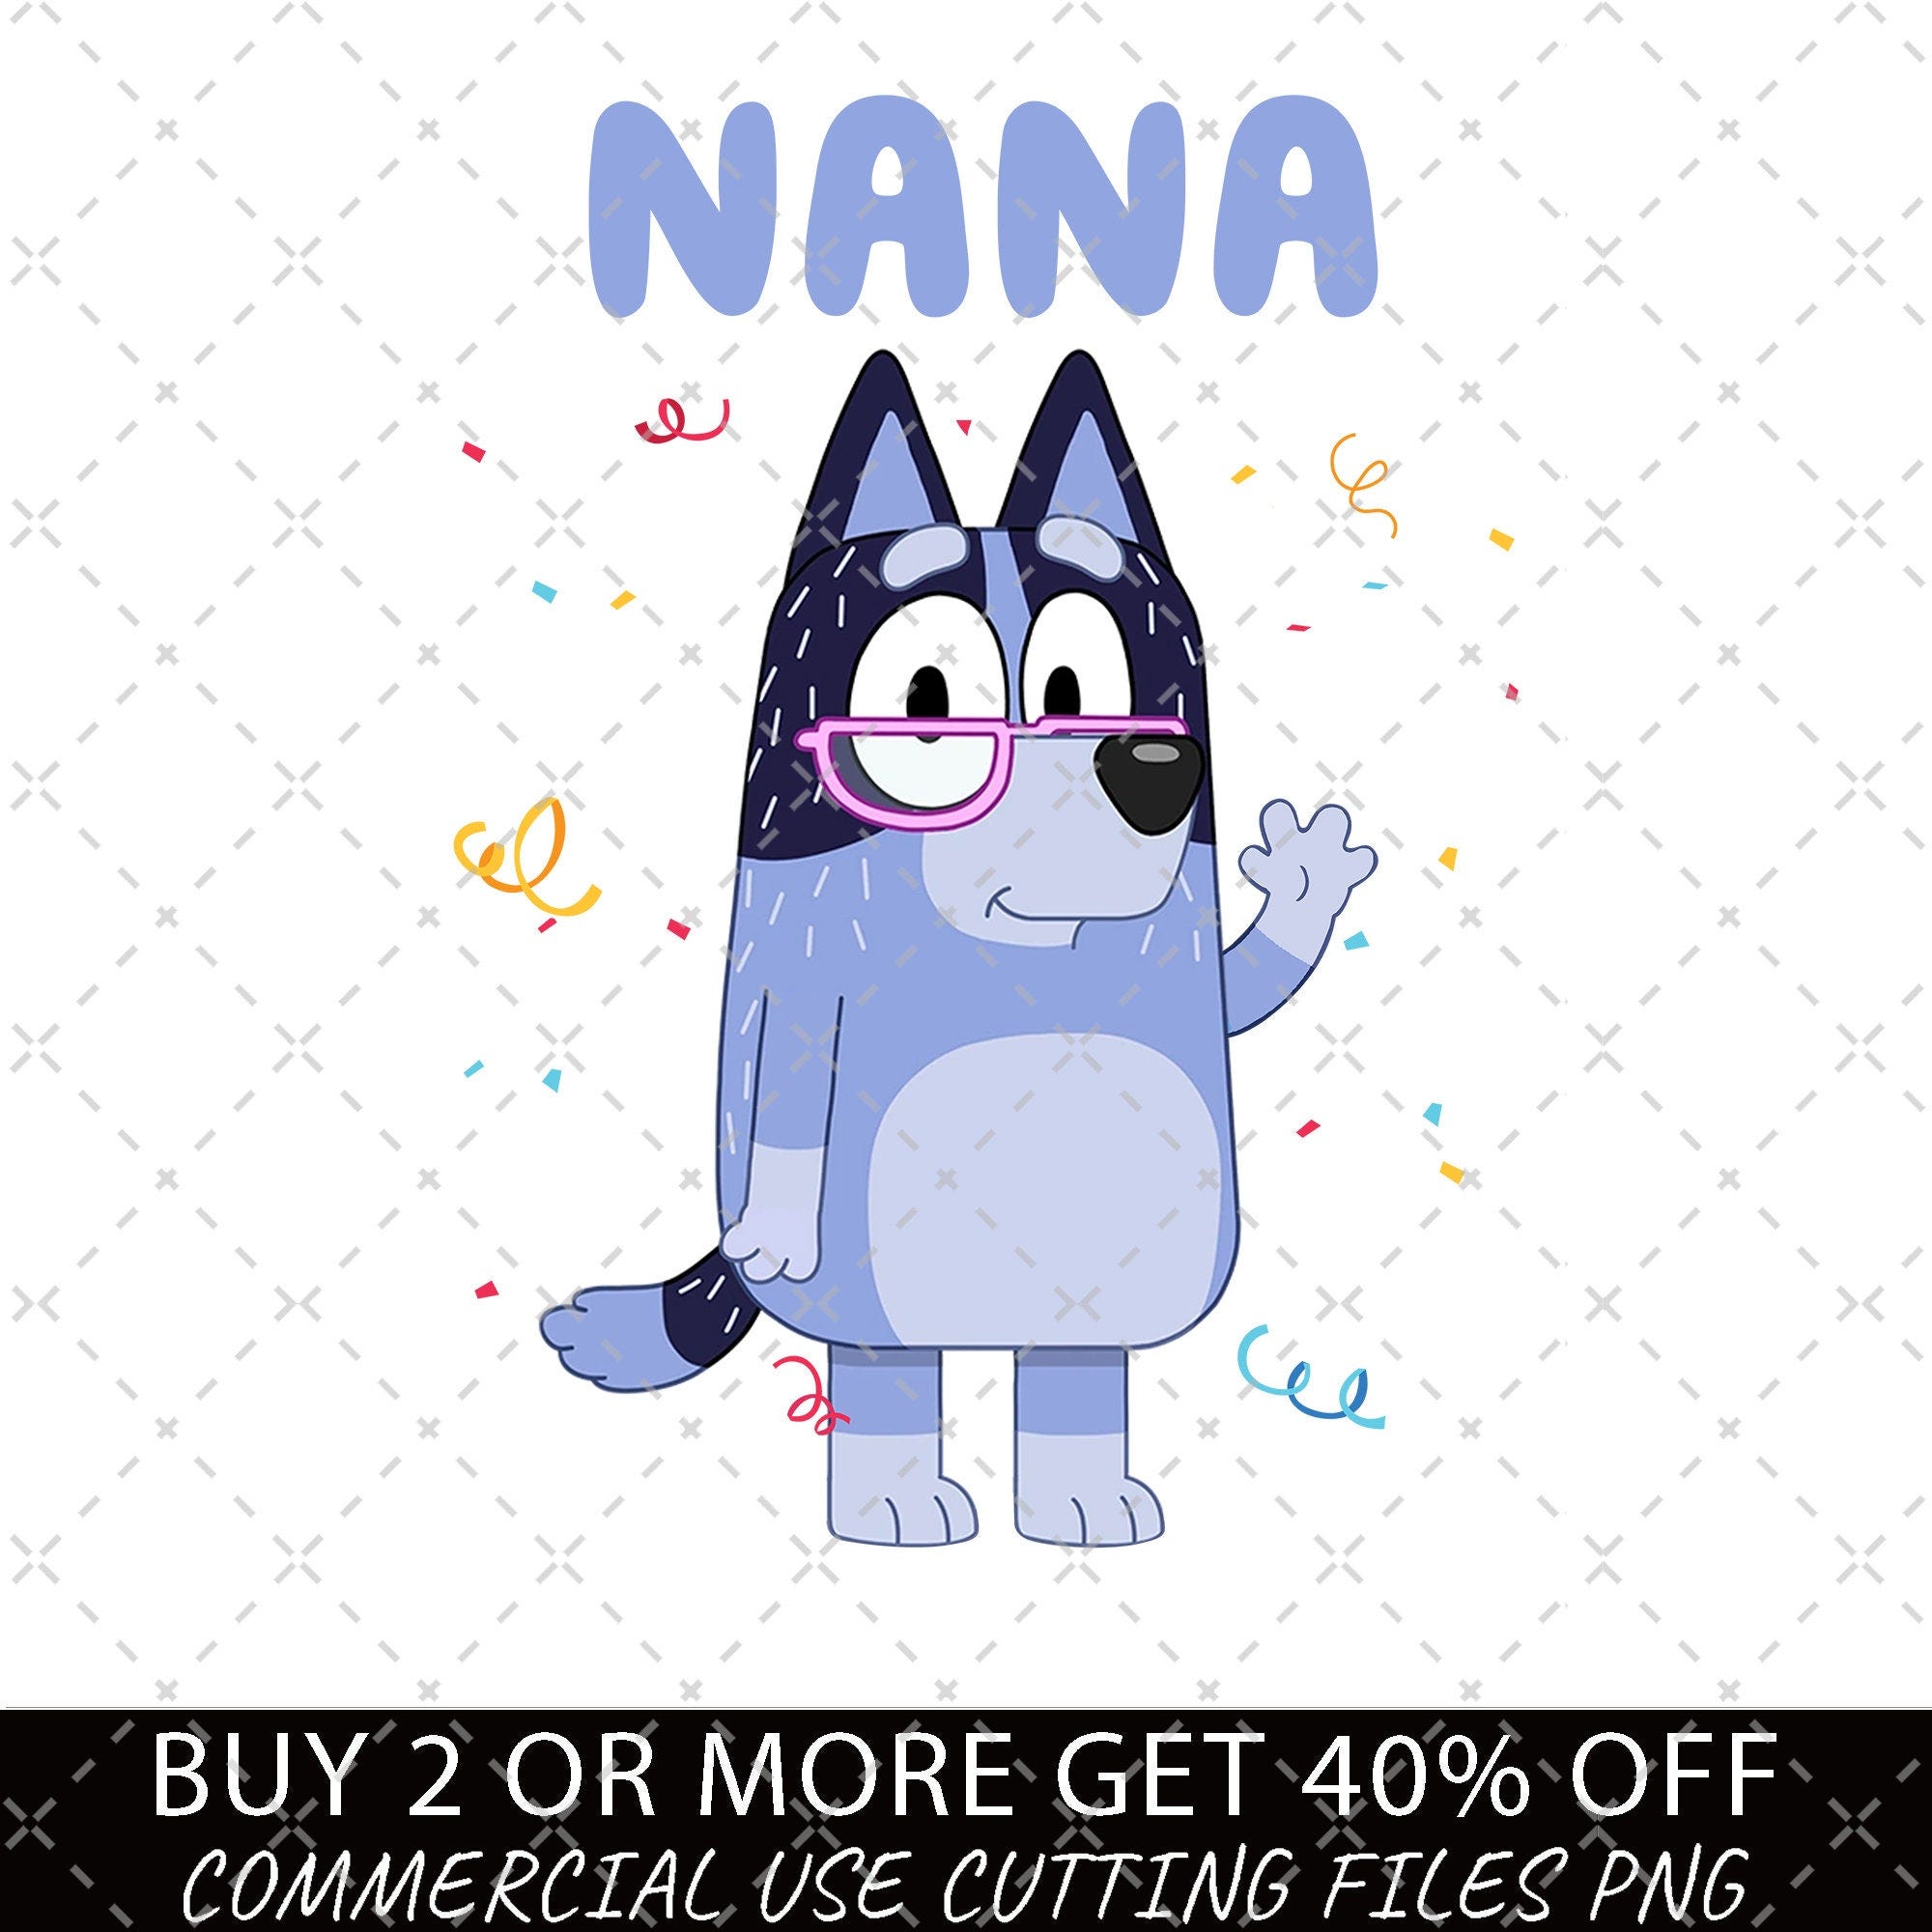 Bluey Nana PNG, Bluey Family Png, Grandma Bluey PNG, Bluey Mothers Day Png, Decal Files, Vinyl Stickers, Car Image, Mothers Day Gifts